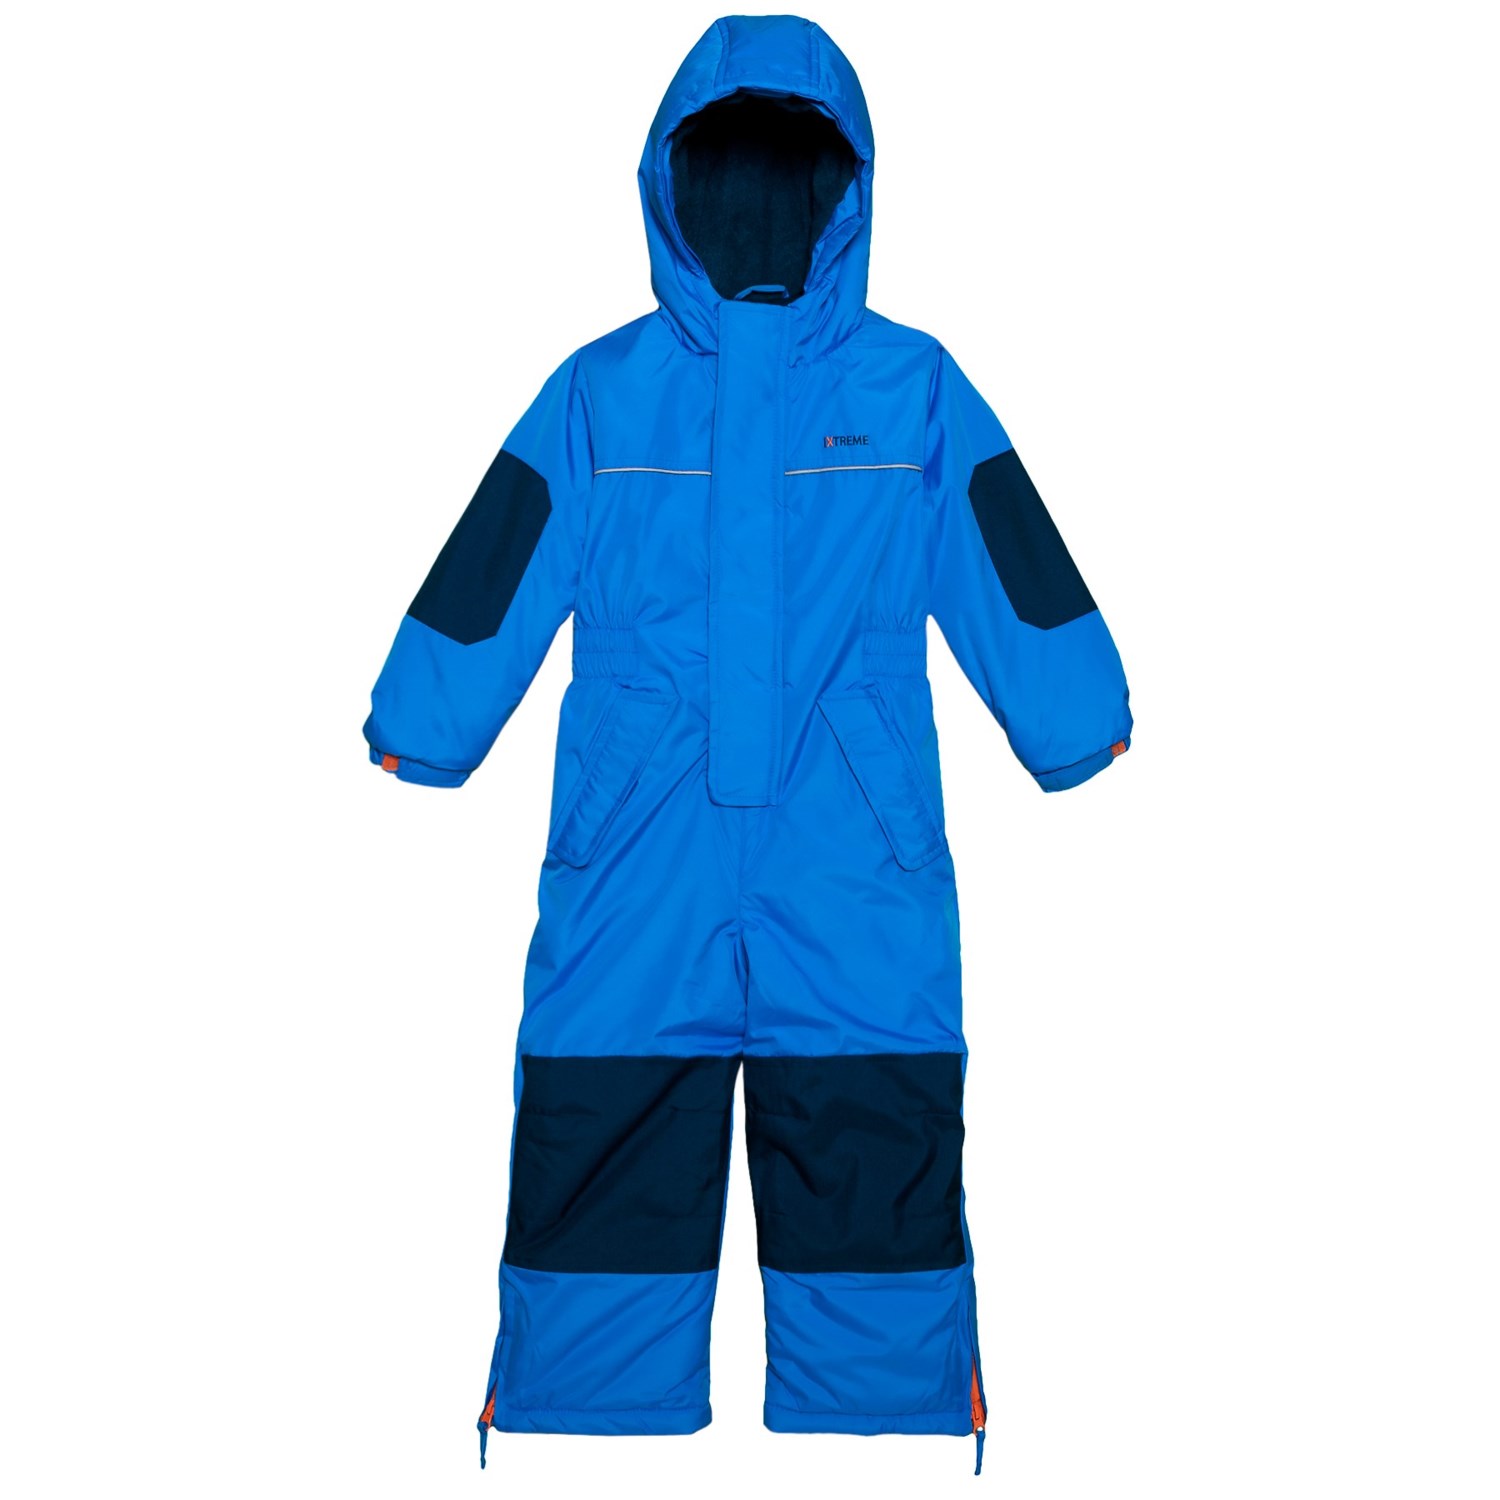 iXtreme Two-Tone Snowsuit – Insulated (For Toddler Boys)